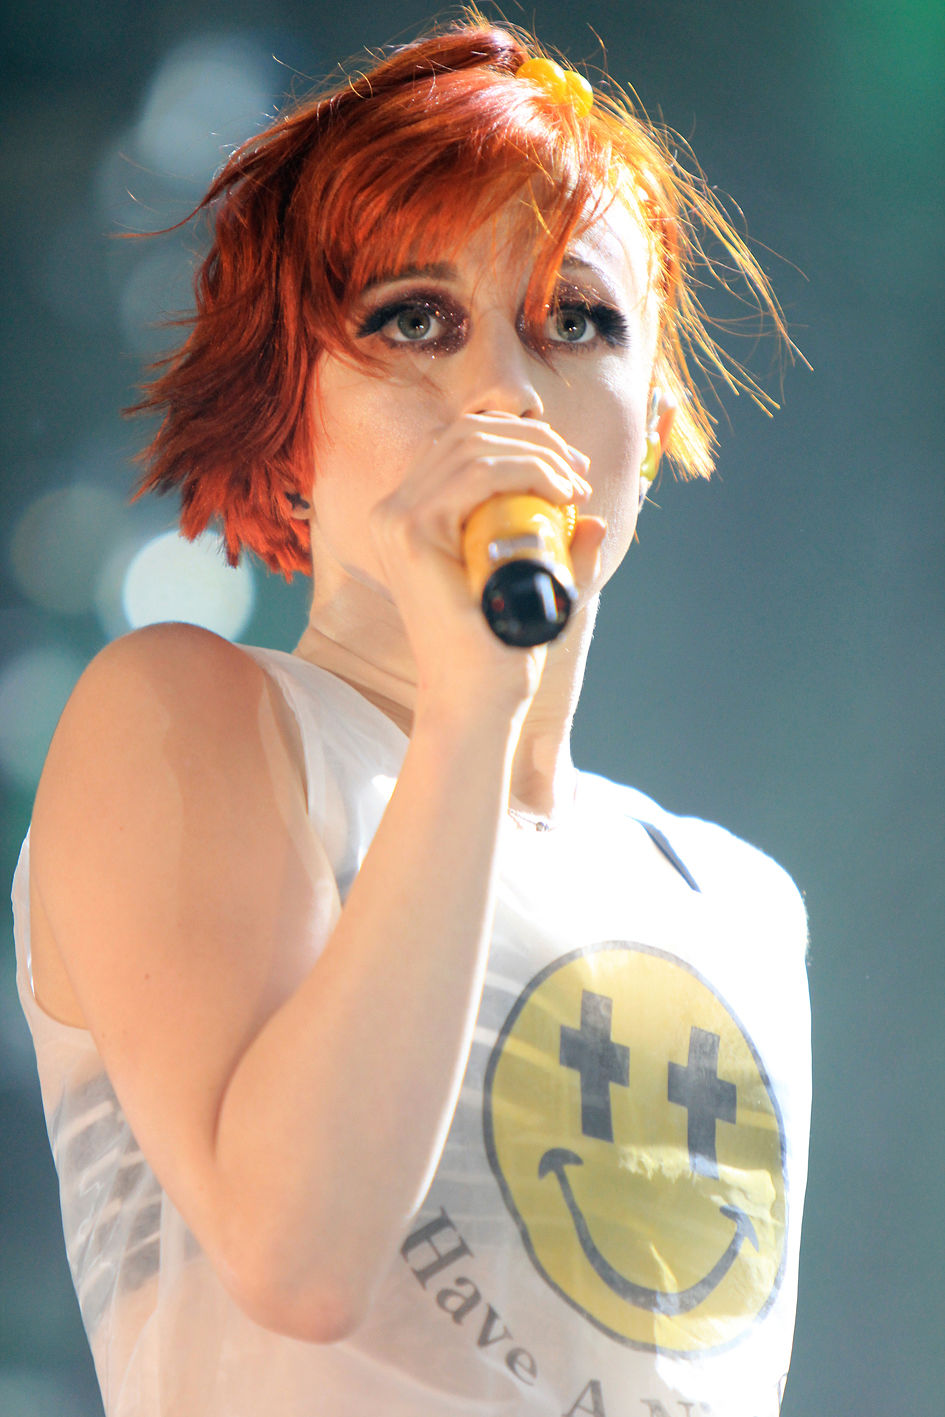 Paramore Live at Manchester Arena 2013